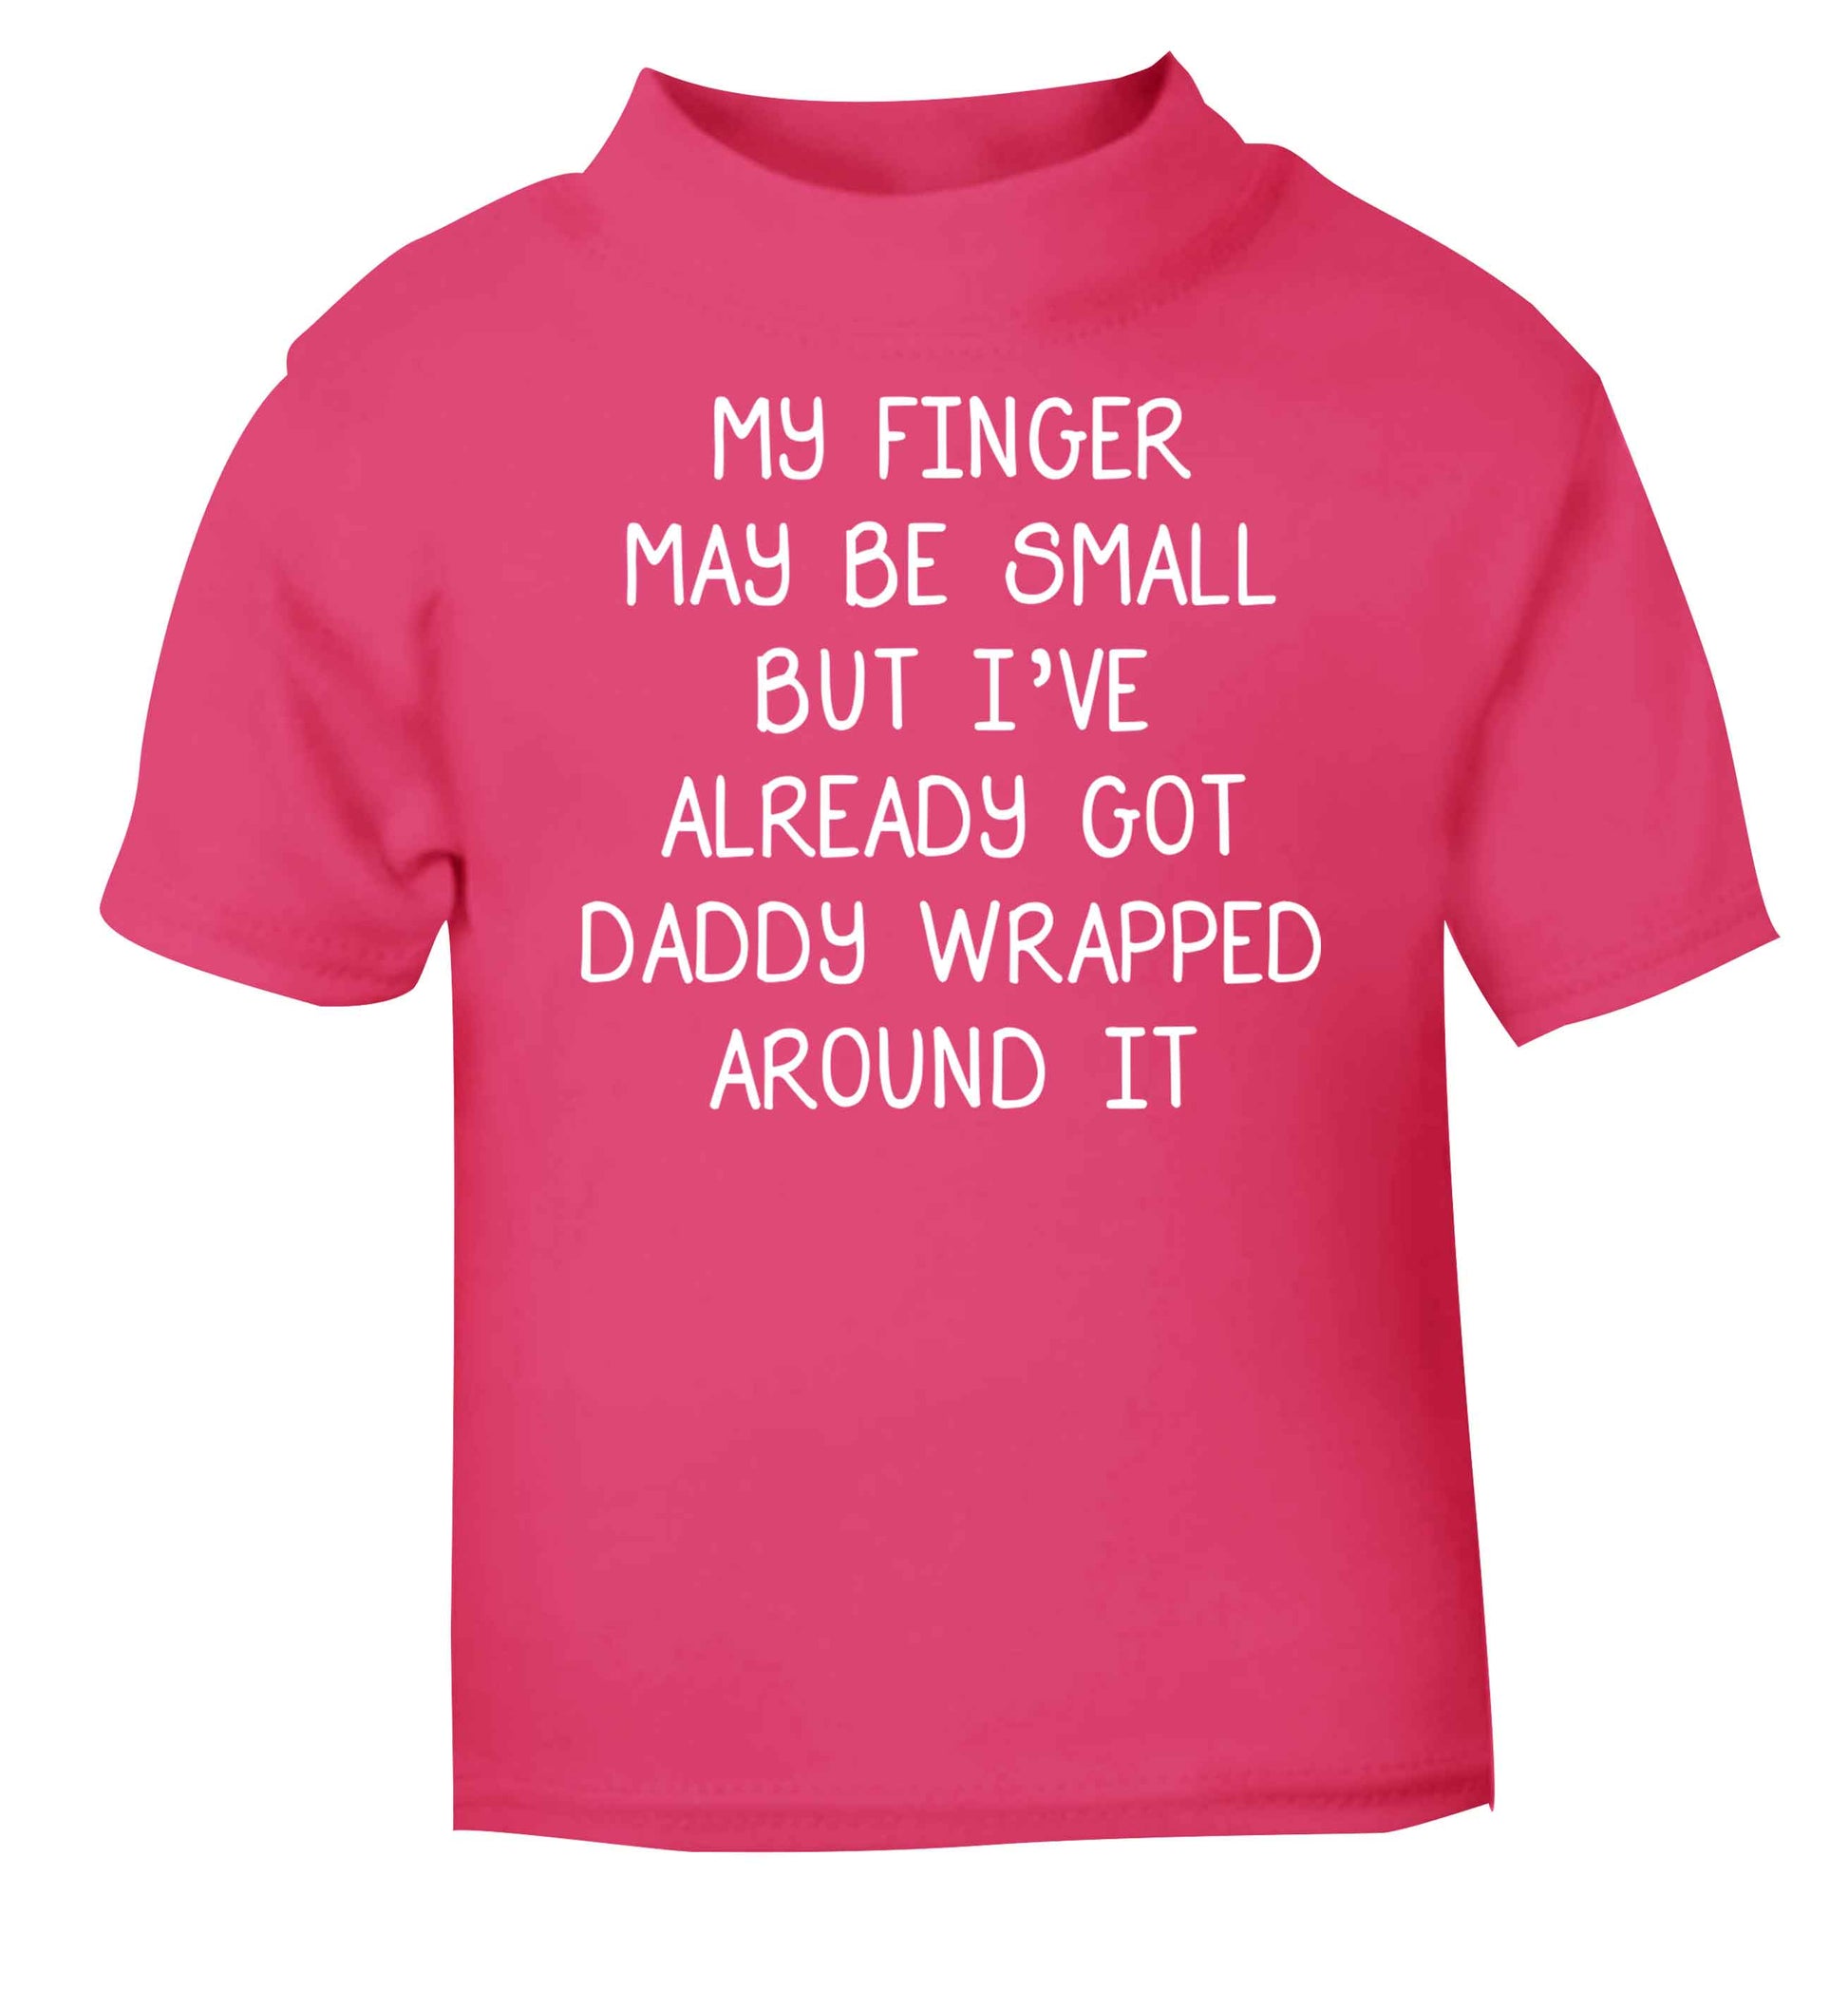 My finger may be small but I've already got daddy wrapped around it pink baby toddler Tshirt 2 Years